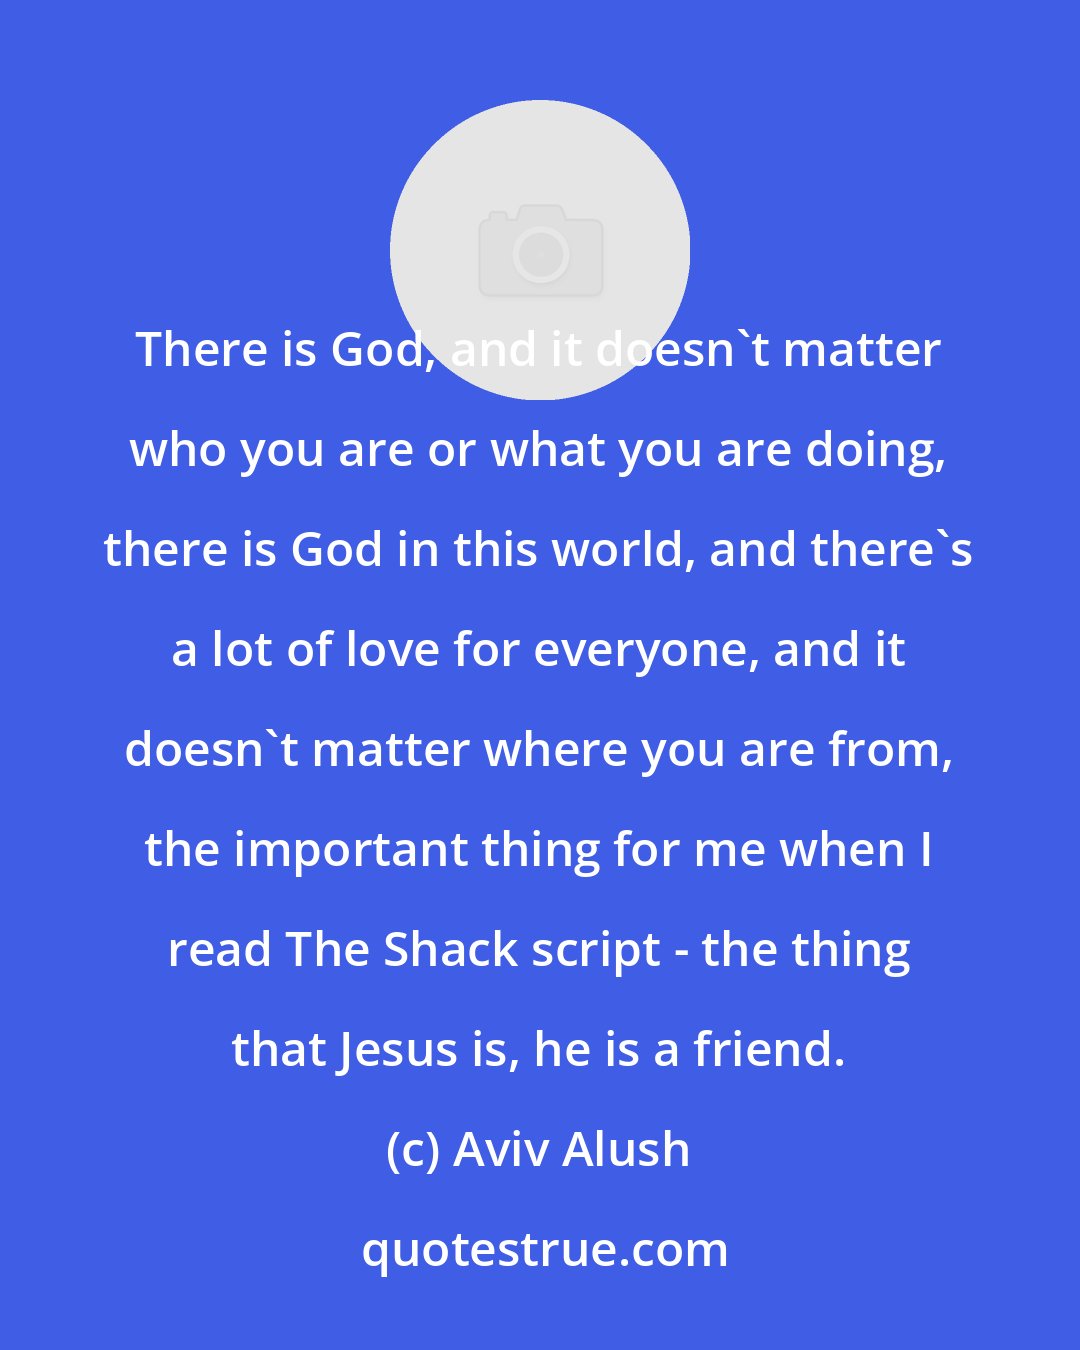 Aviv Alush: There is God, and it doesn't matter who you are or what you are doing, there is God in this world, and there's a lot of love for everyone, and it doesn't matter where you are from, the important thing for me when I read The Shack script - the thing that Jesus is, he is a friend.